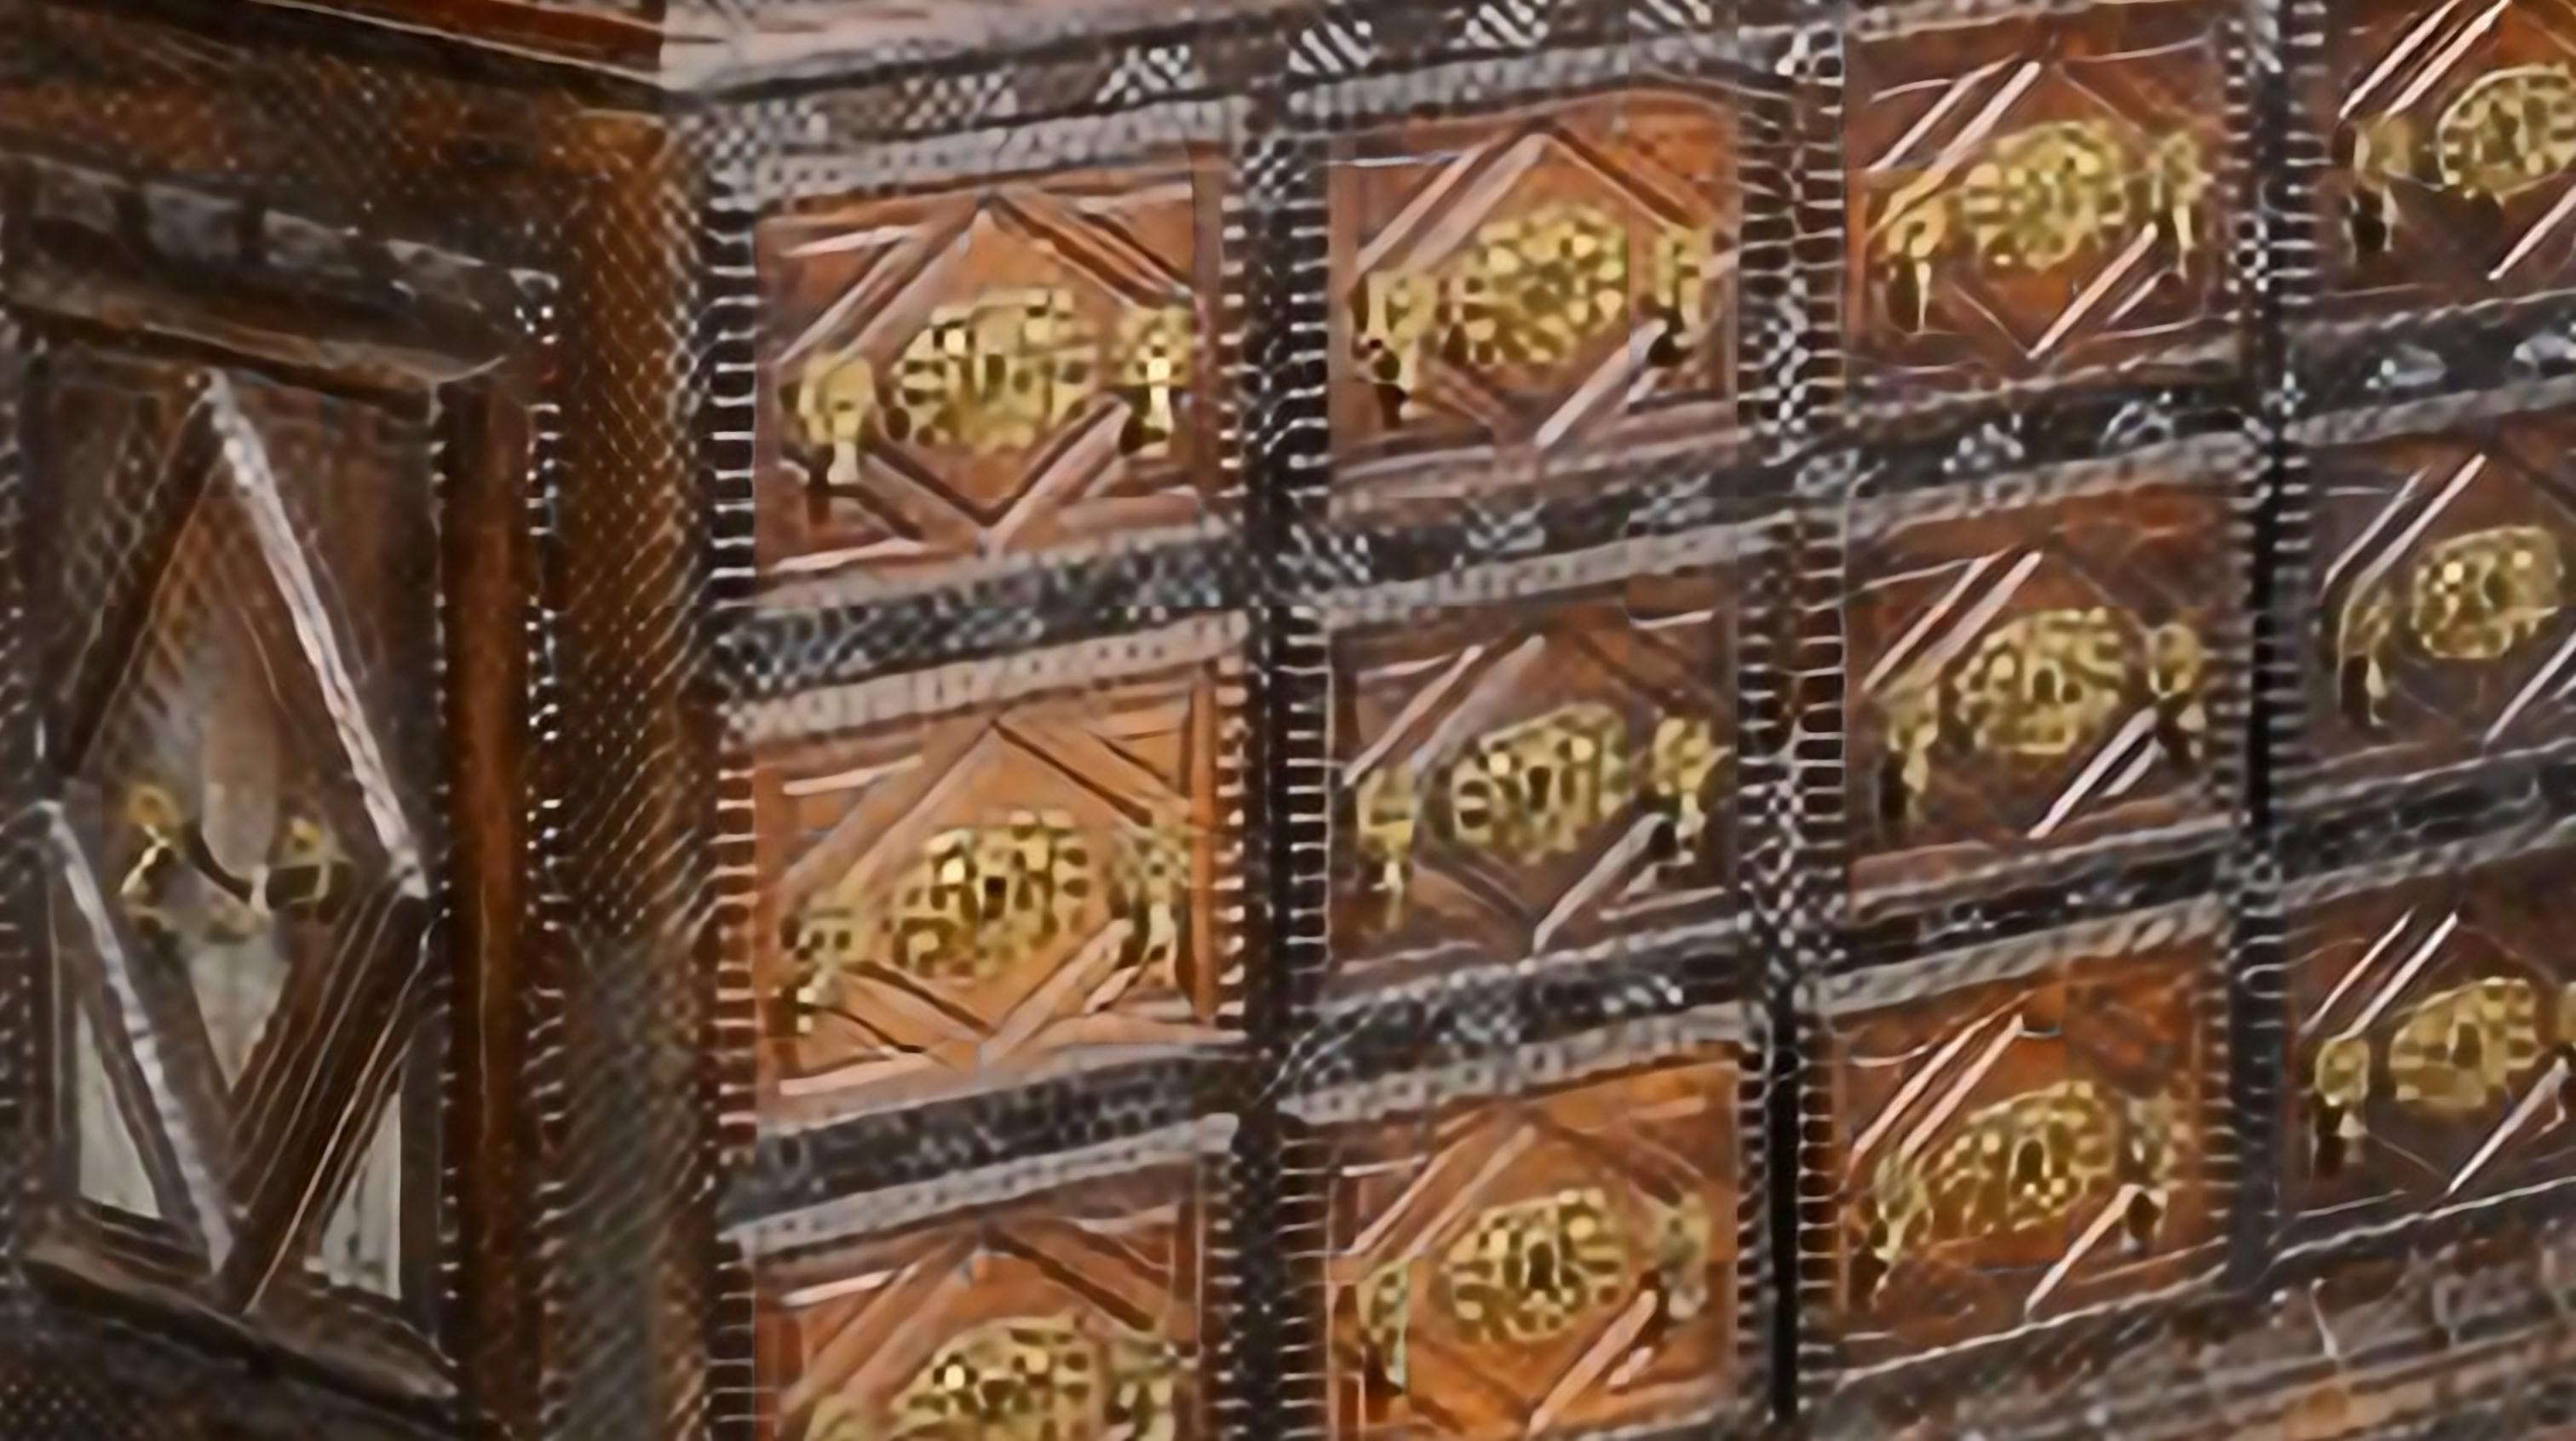 COUNTER / CABINET.

Portuguese 17th century.
in Brazilian Rosewood.
Twisted and shivered decoration.
With ten drawers simulating twelve.
Base with cut and hollow skirts, turned legs and transoms. Lacy hardware in yellow